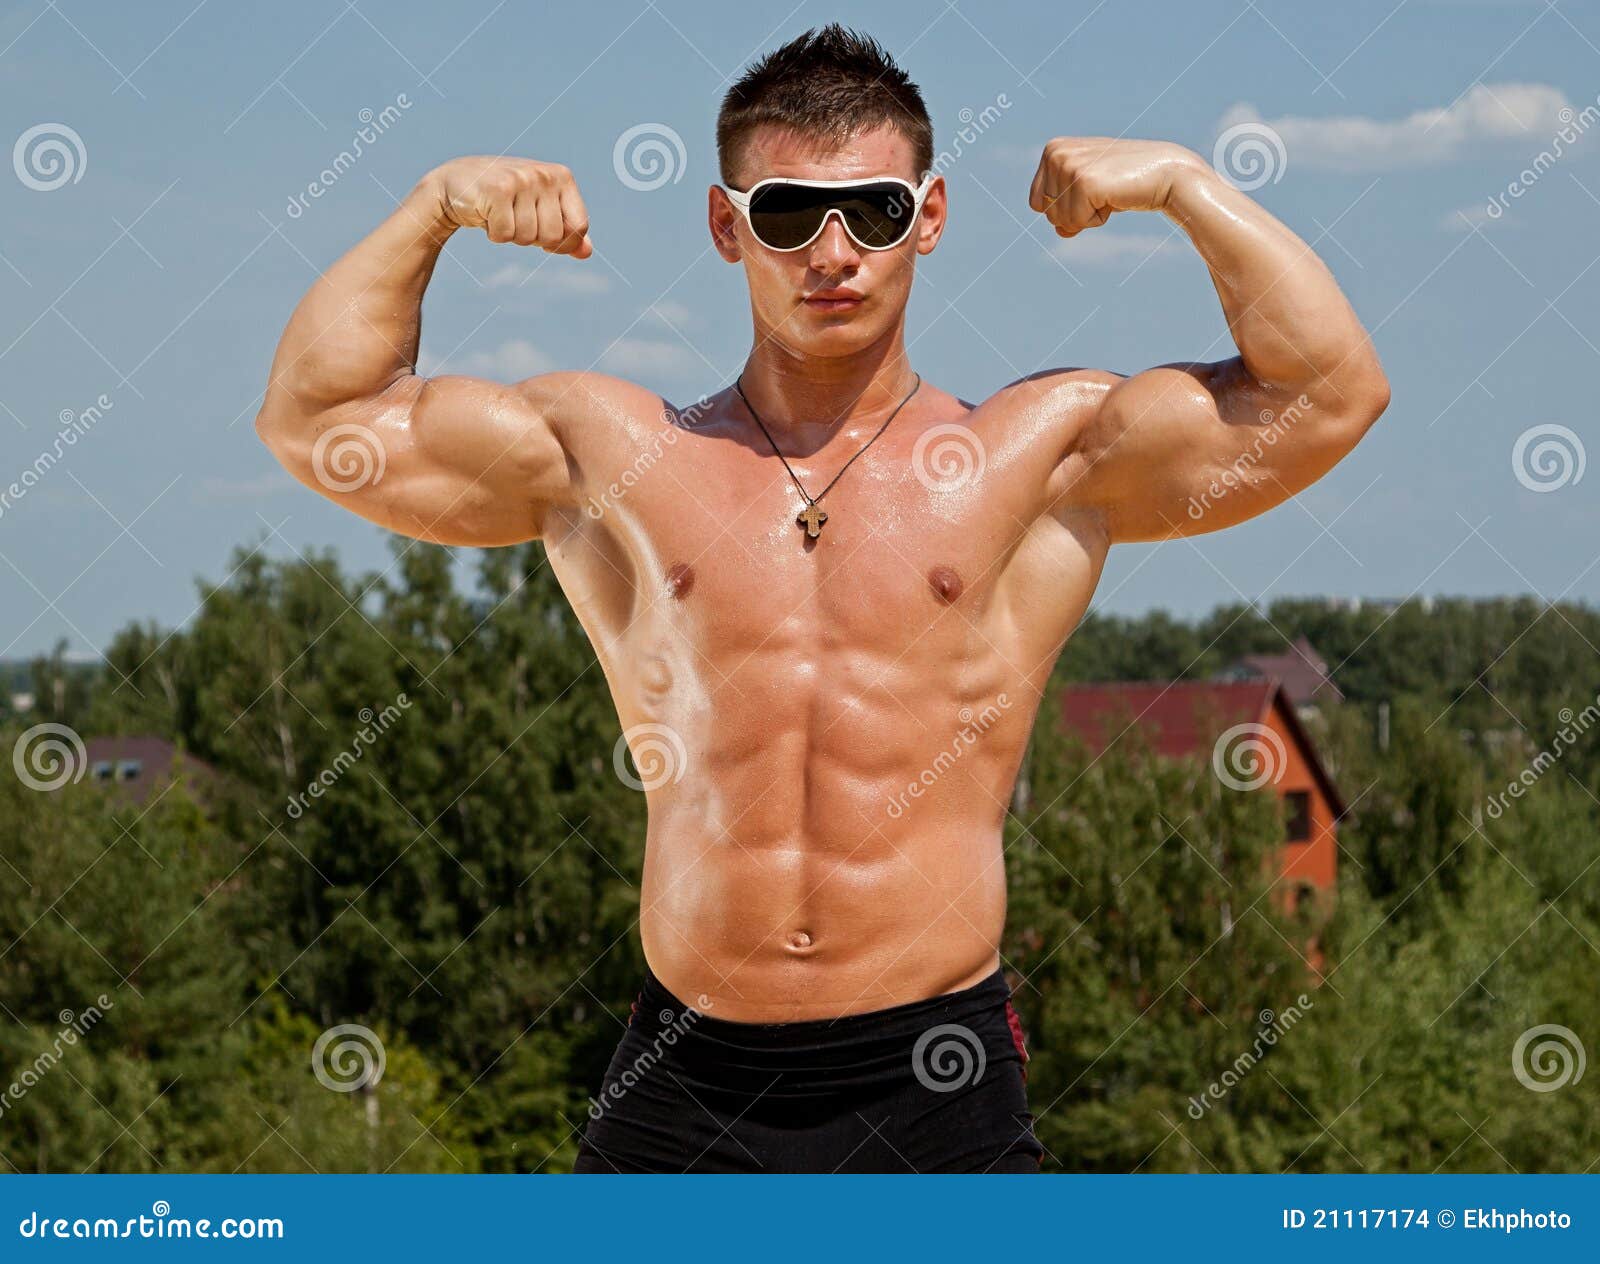 Portrait Of Sexy Muscular Man With Bare-chested Posing On 